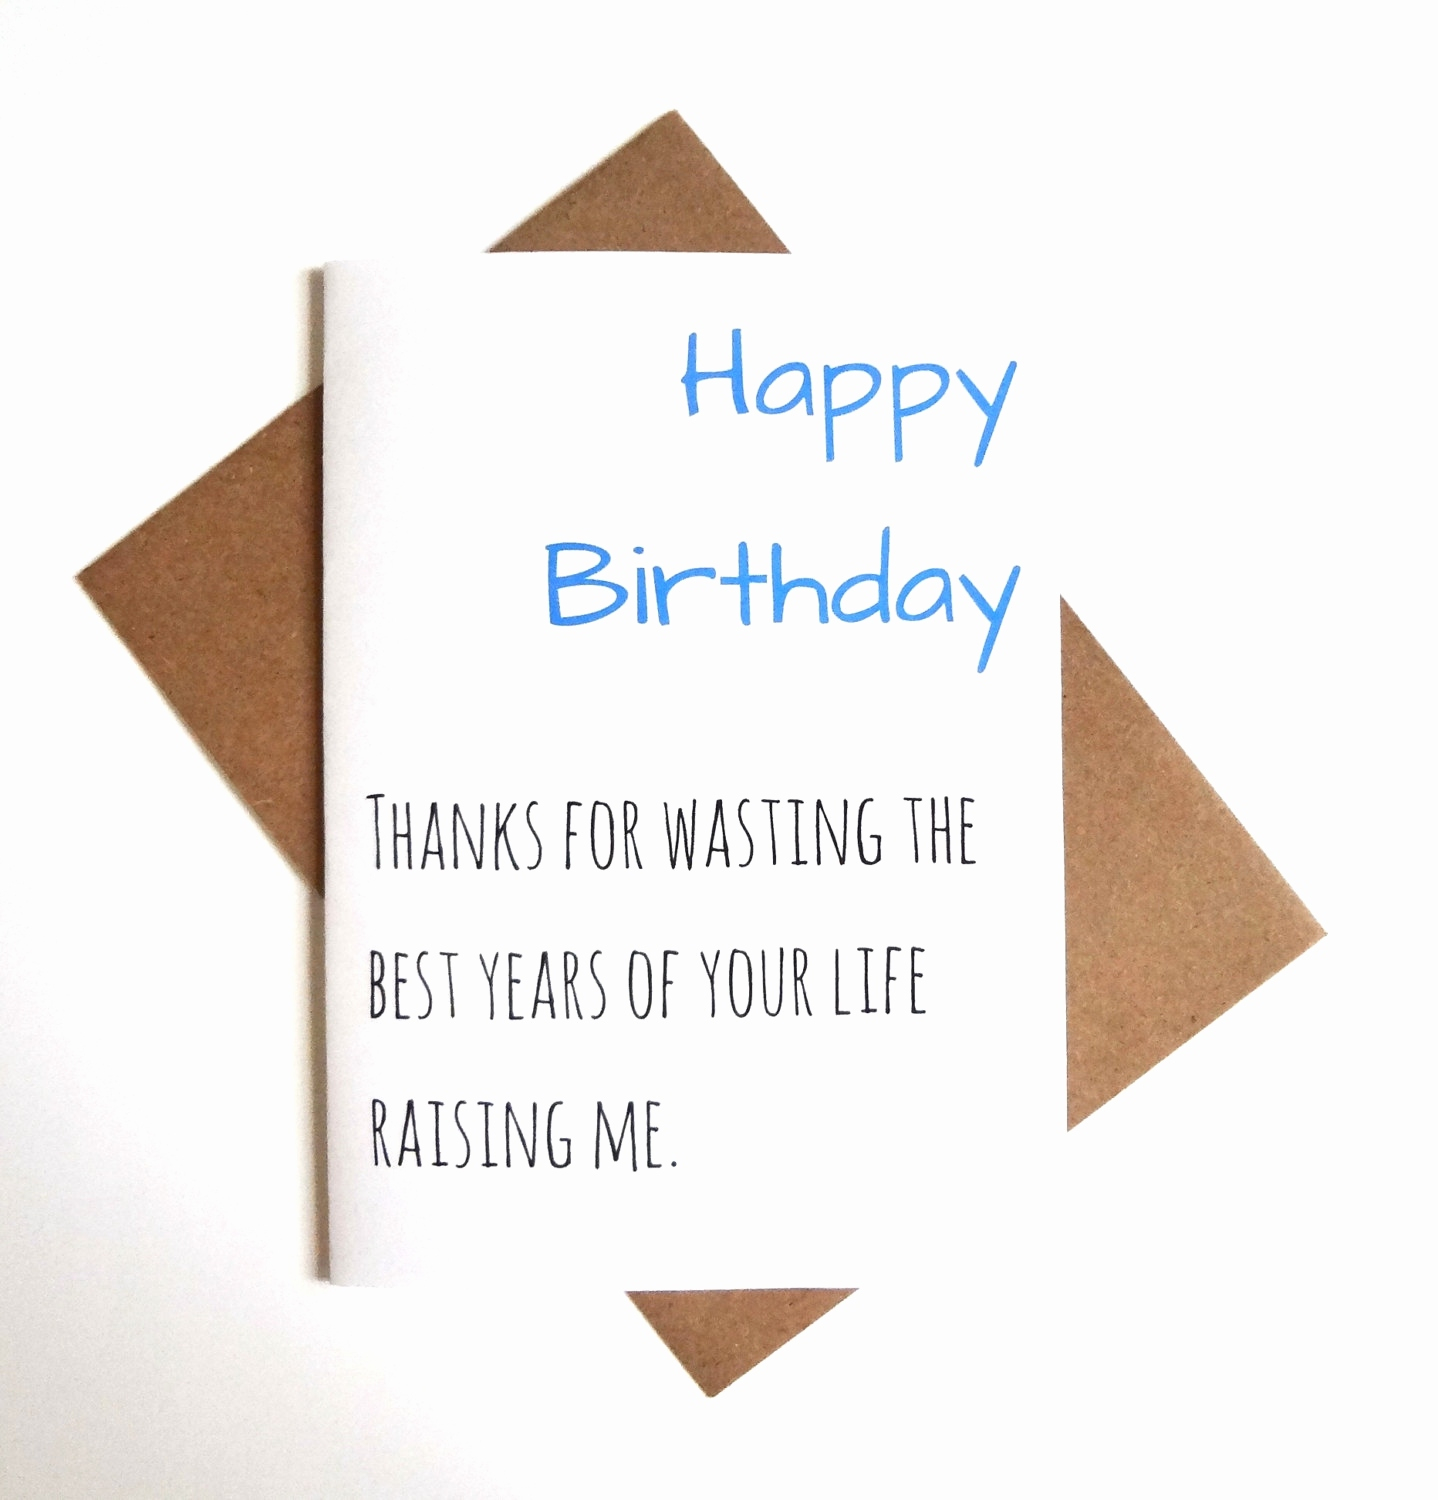 Funny Birthday Card Ideas For Dad Clever Birthday Cards For Dad New Funny Husband Birthday Cards Trump